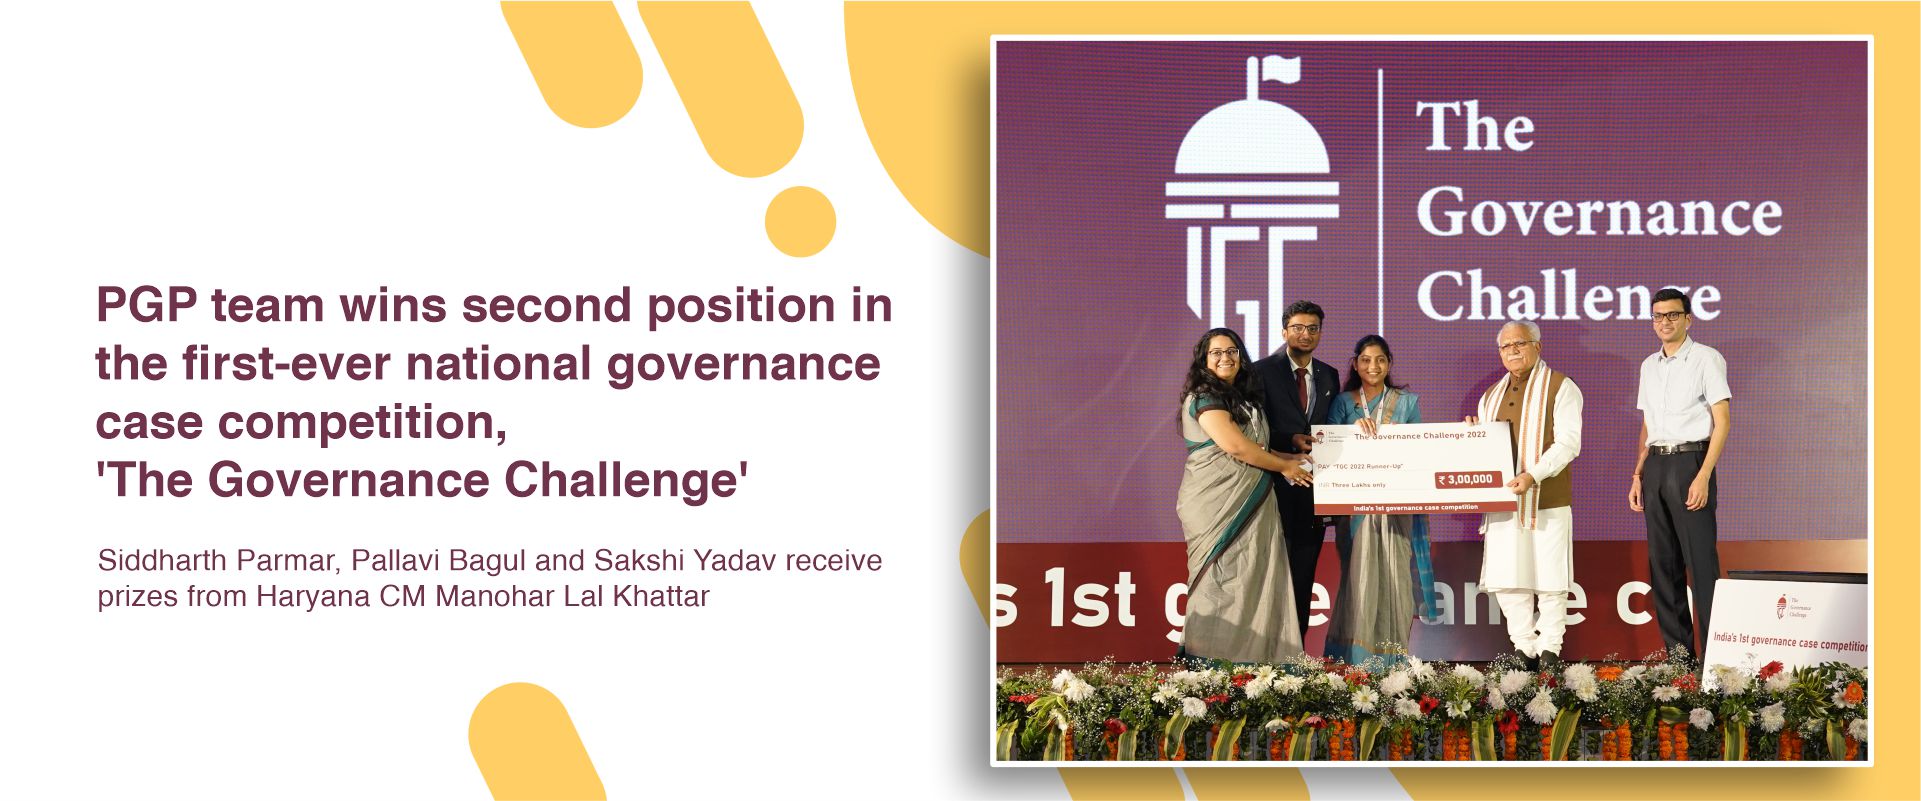 PGP team wins second position in the first-ever national governance case competition, ‘The Governance Challenge’